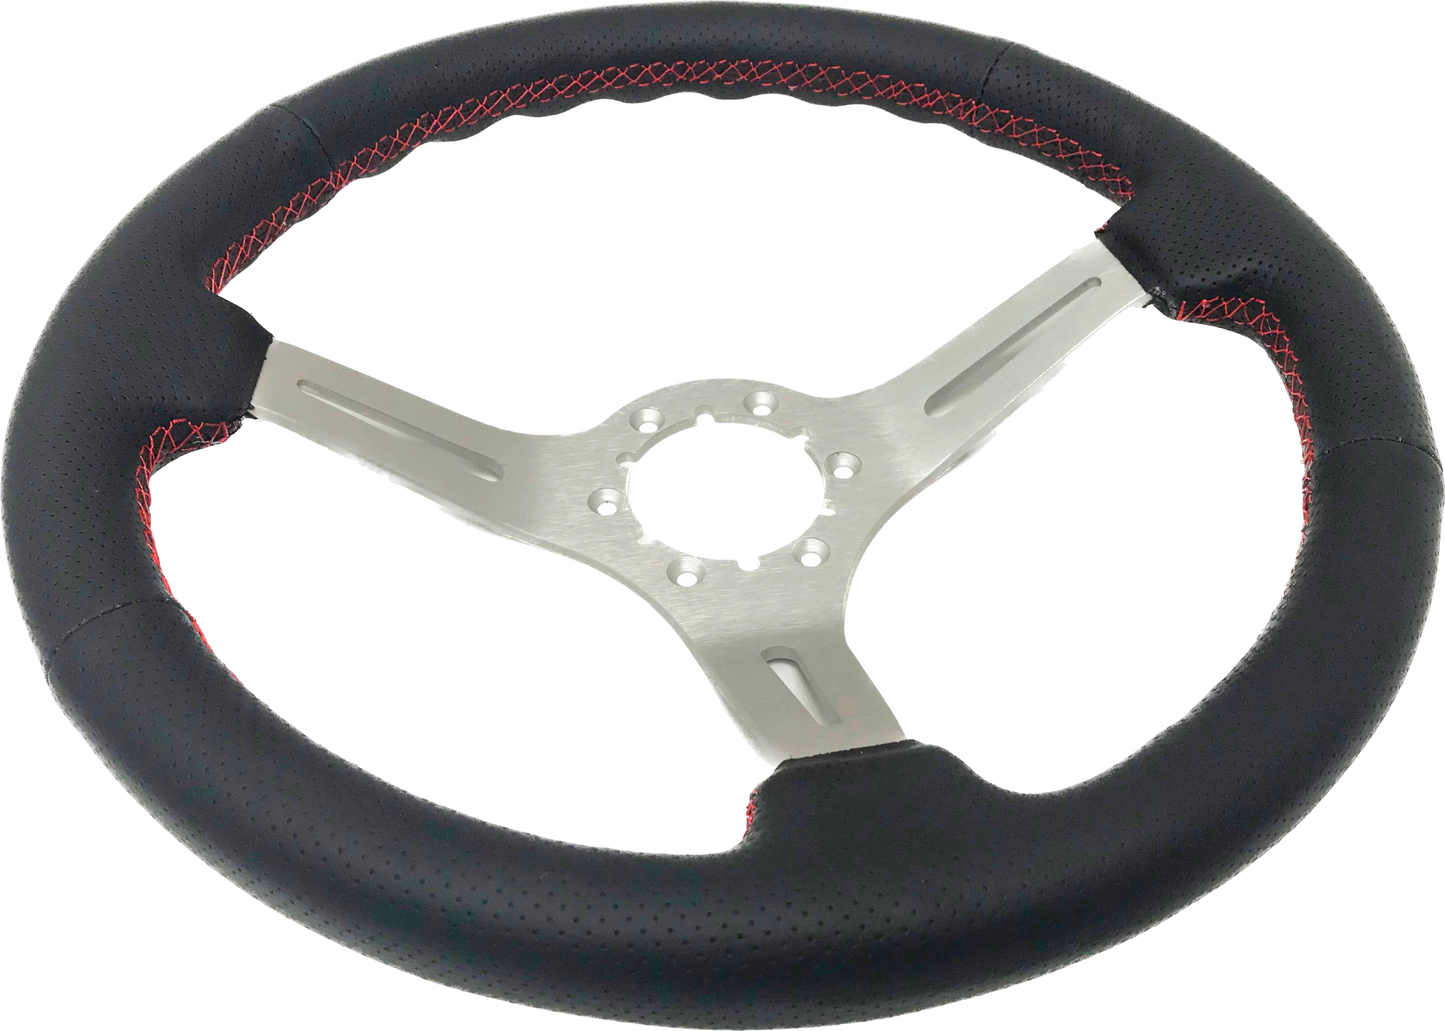 Hyundai Accent Steering Wheel Kit | Perforated Leather | ST3587BLK-RED